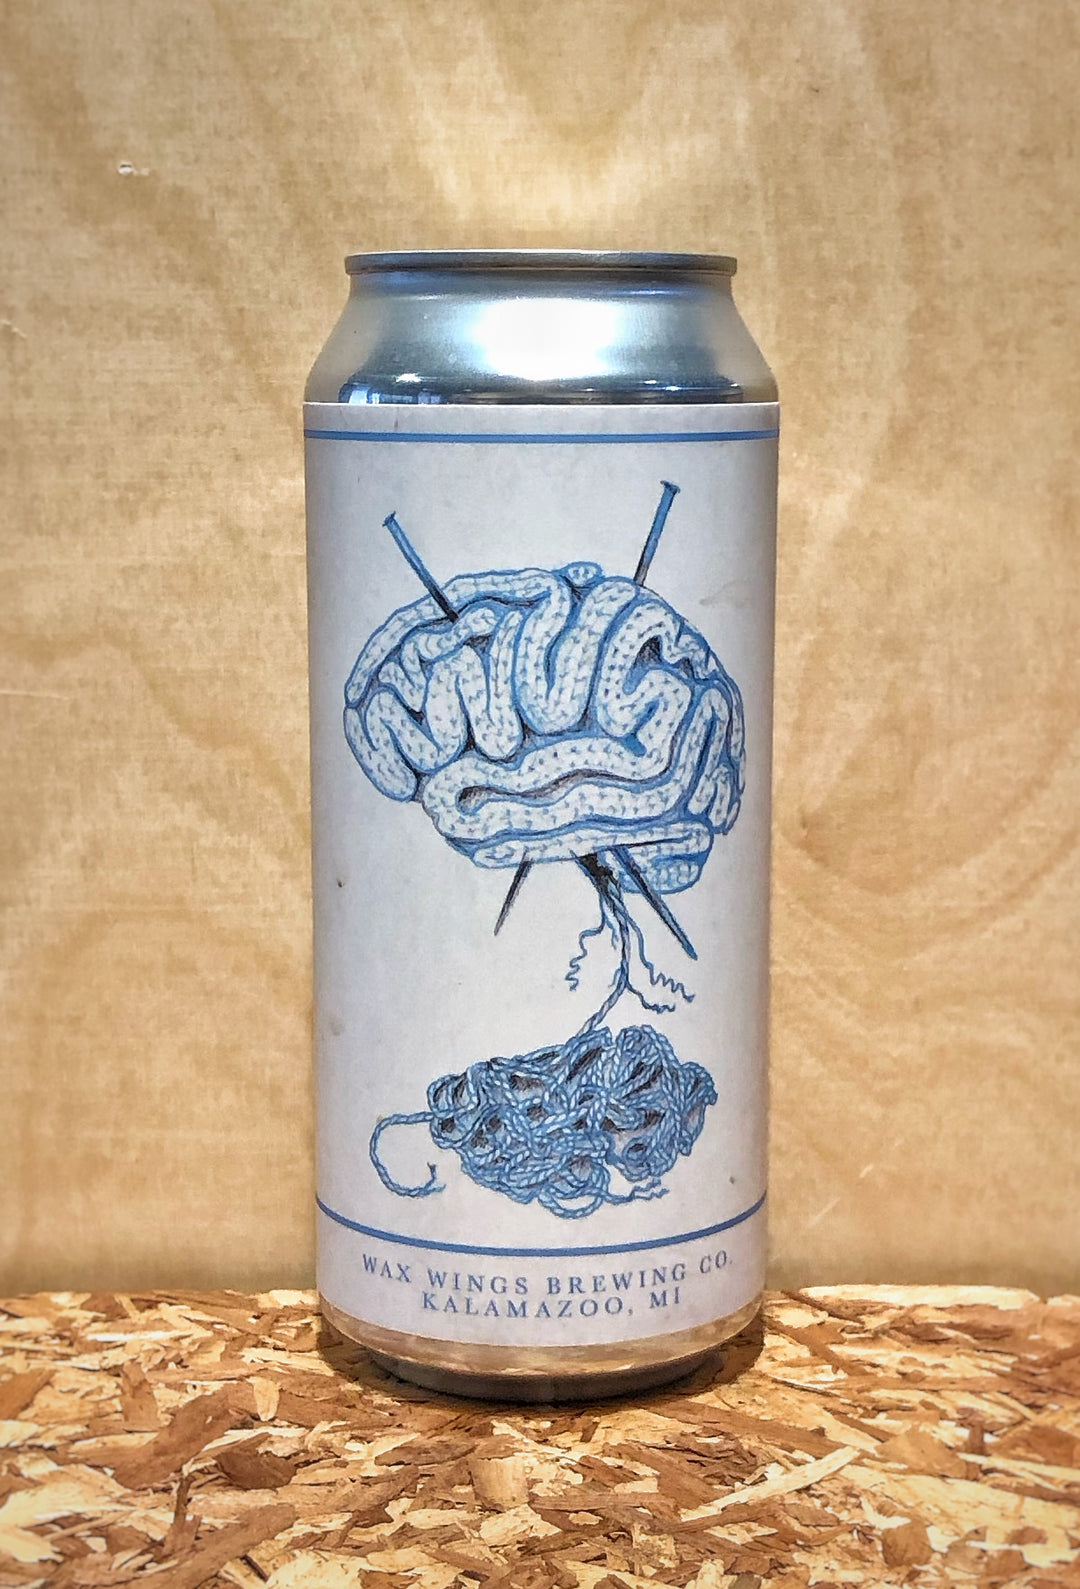 Wax Wings Brewing Co. 'The Loose Threads of a Restless Mind' Double IPA (Kalamazoo, MI)